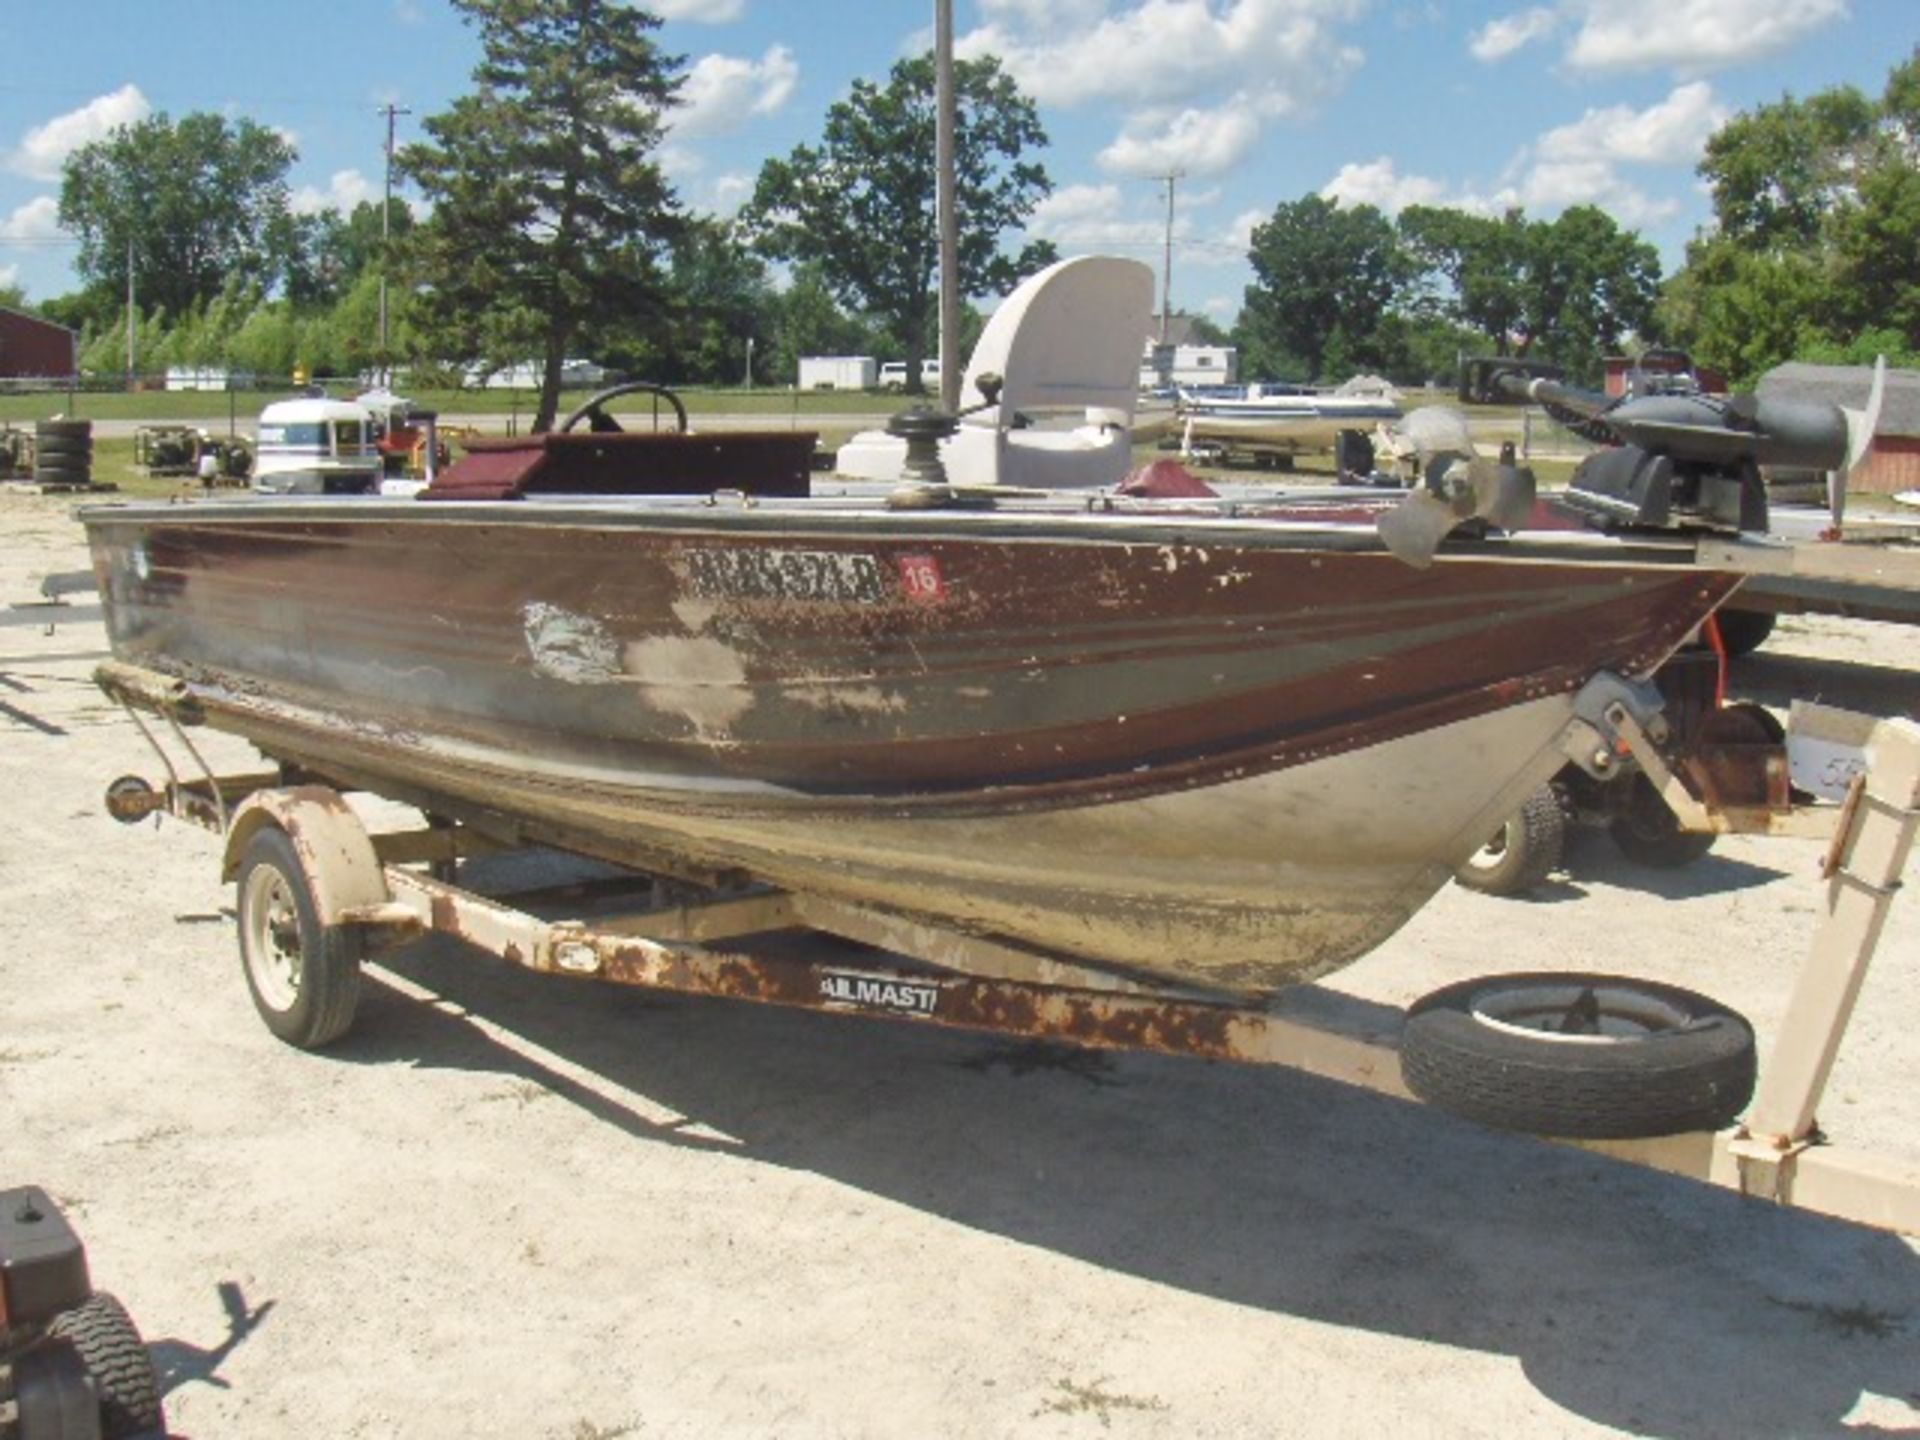 1983 SMOKERCRAFT 35HP W/TRLMSR 1 AXLE 18'TRLR 1 AXLE 18'TRLR  NO S# boat w/trailer, owner started at